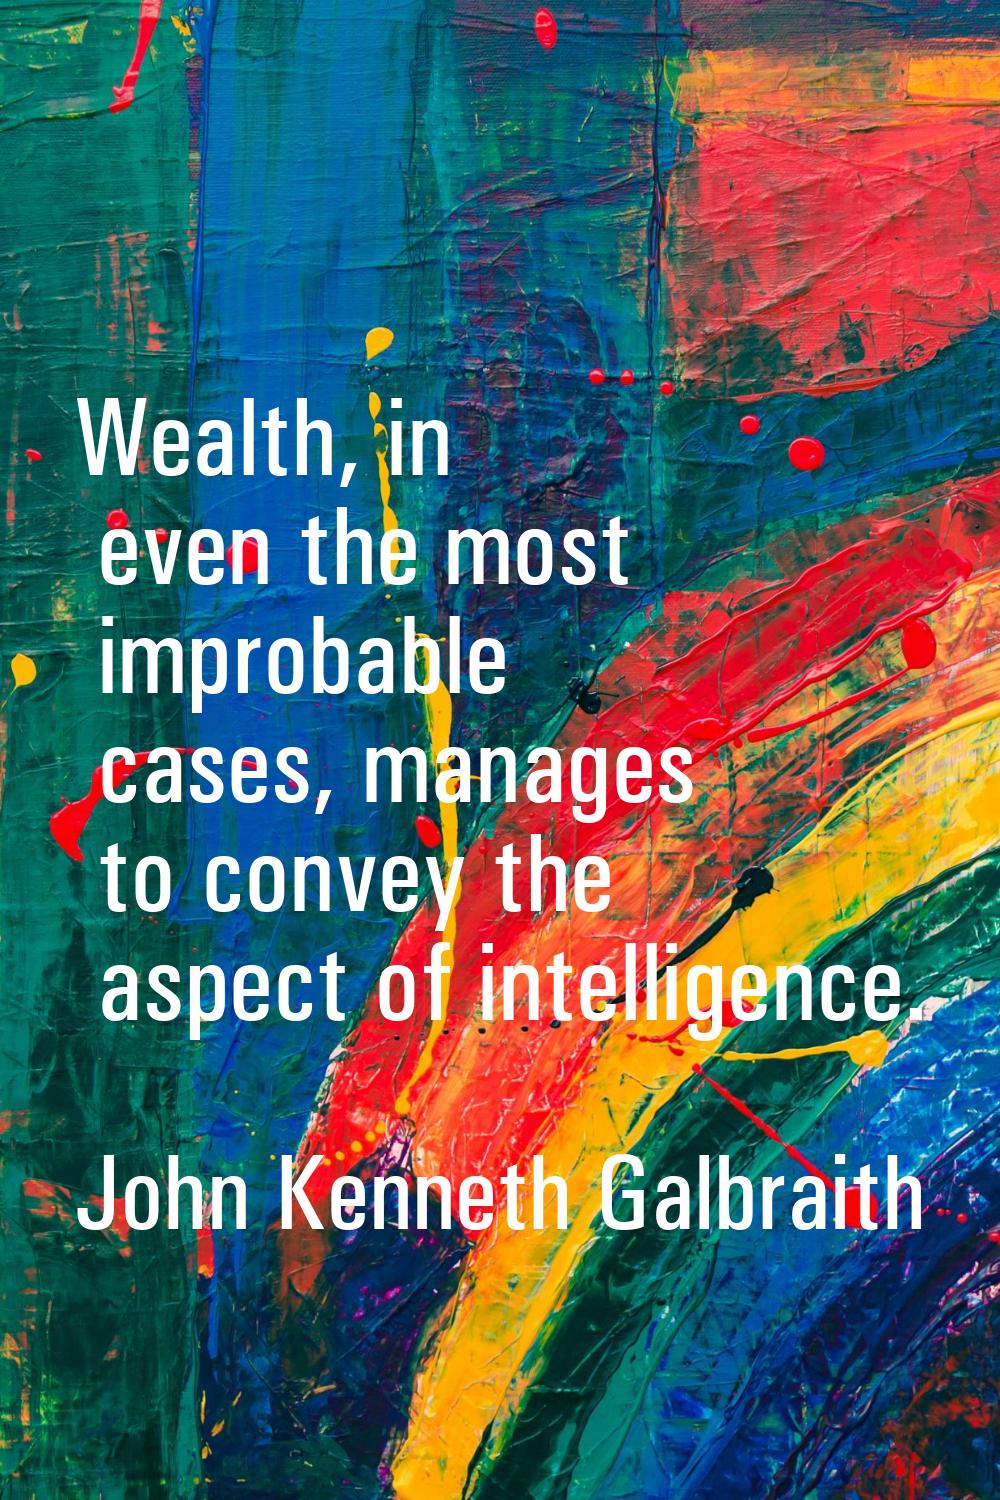 Wealth, in even the most improbable cases, manages to convey the aspect of intelligence.